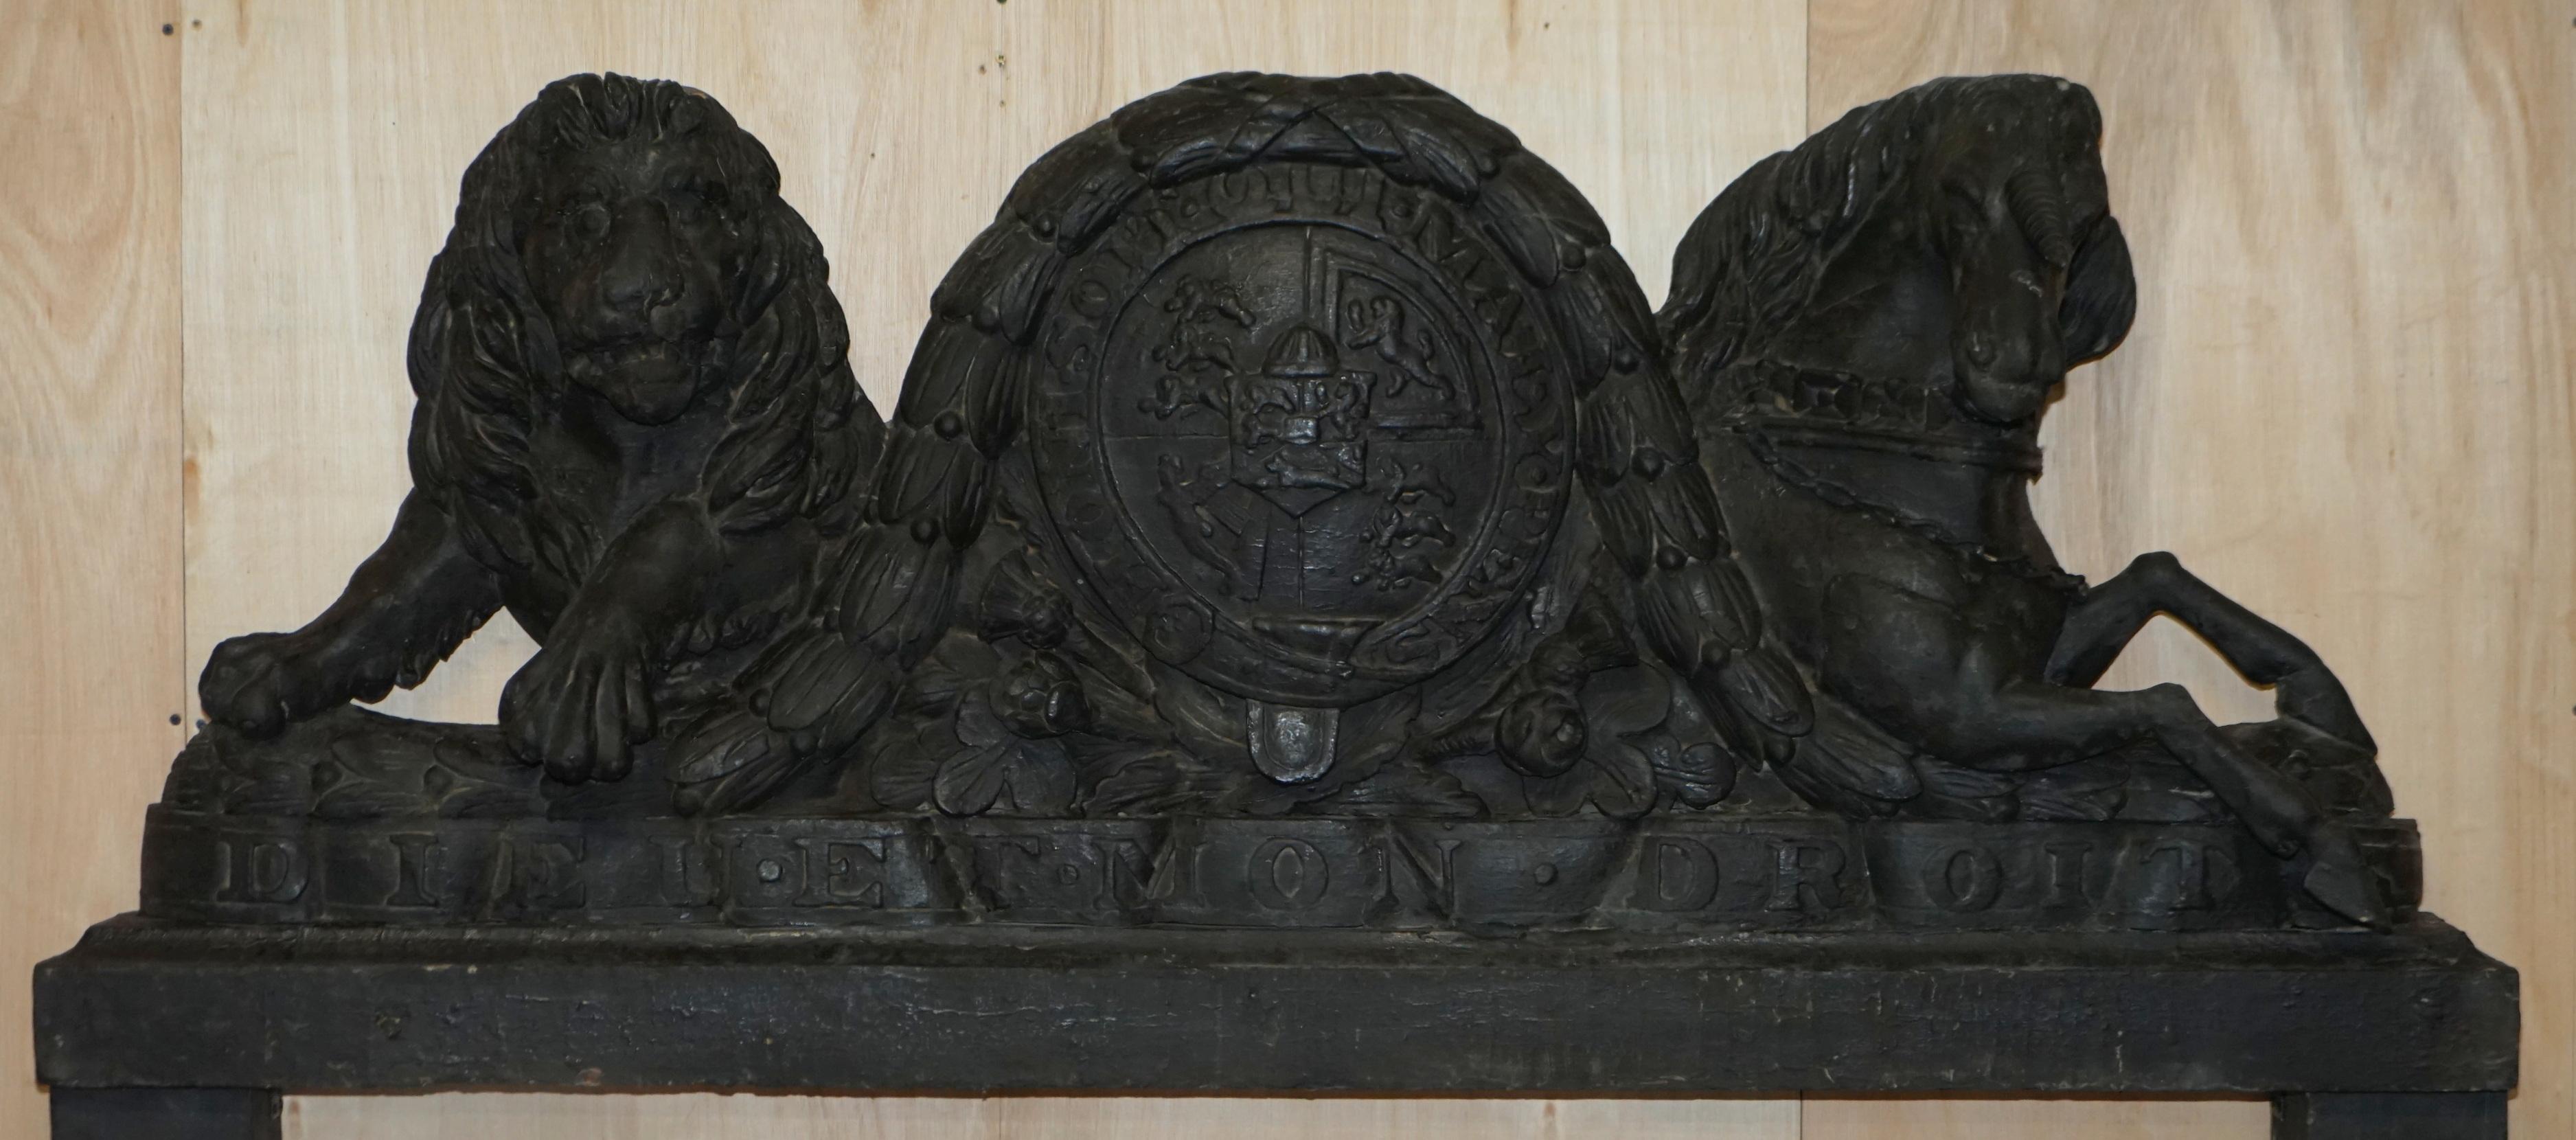 Royal House Antiques

Royal House Antiques is delighted to offer for sale this stunning ornately carved circa 1400 Henry VIII Armorial Crest Coat of Arms fireplace with Dieu Et Mon Droit (French for God and my right) carved in the front and the